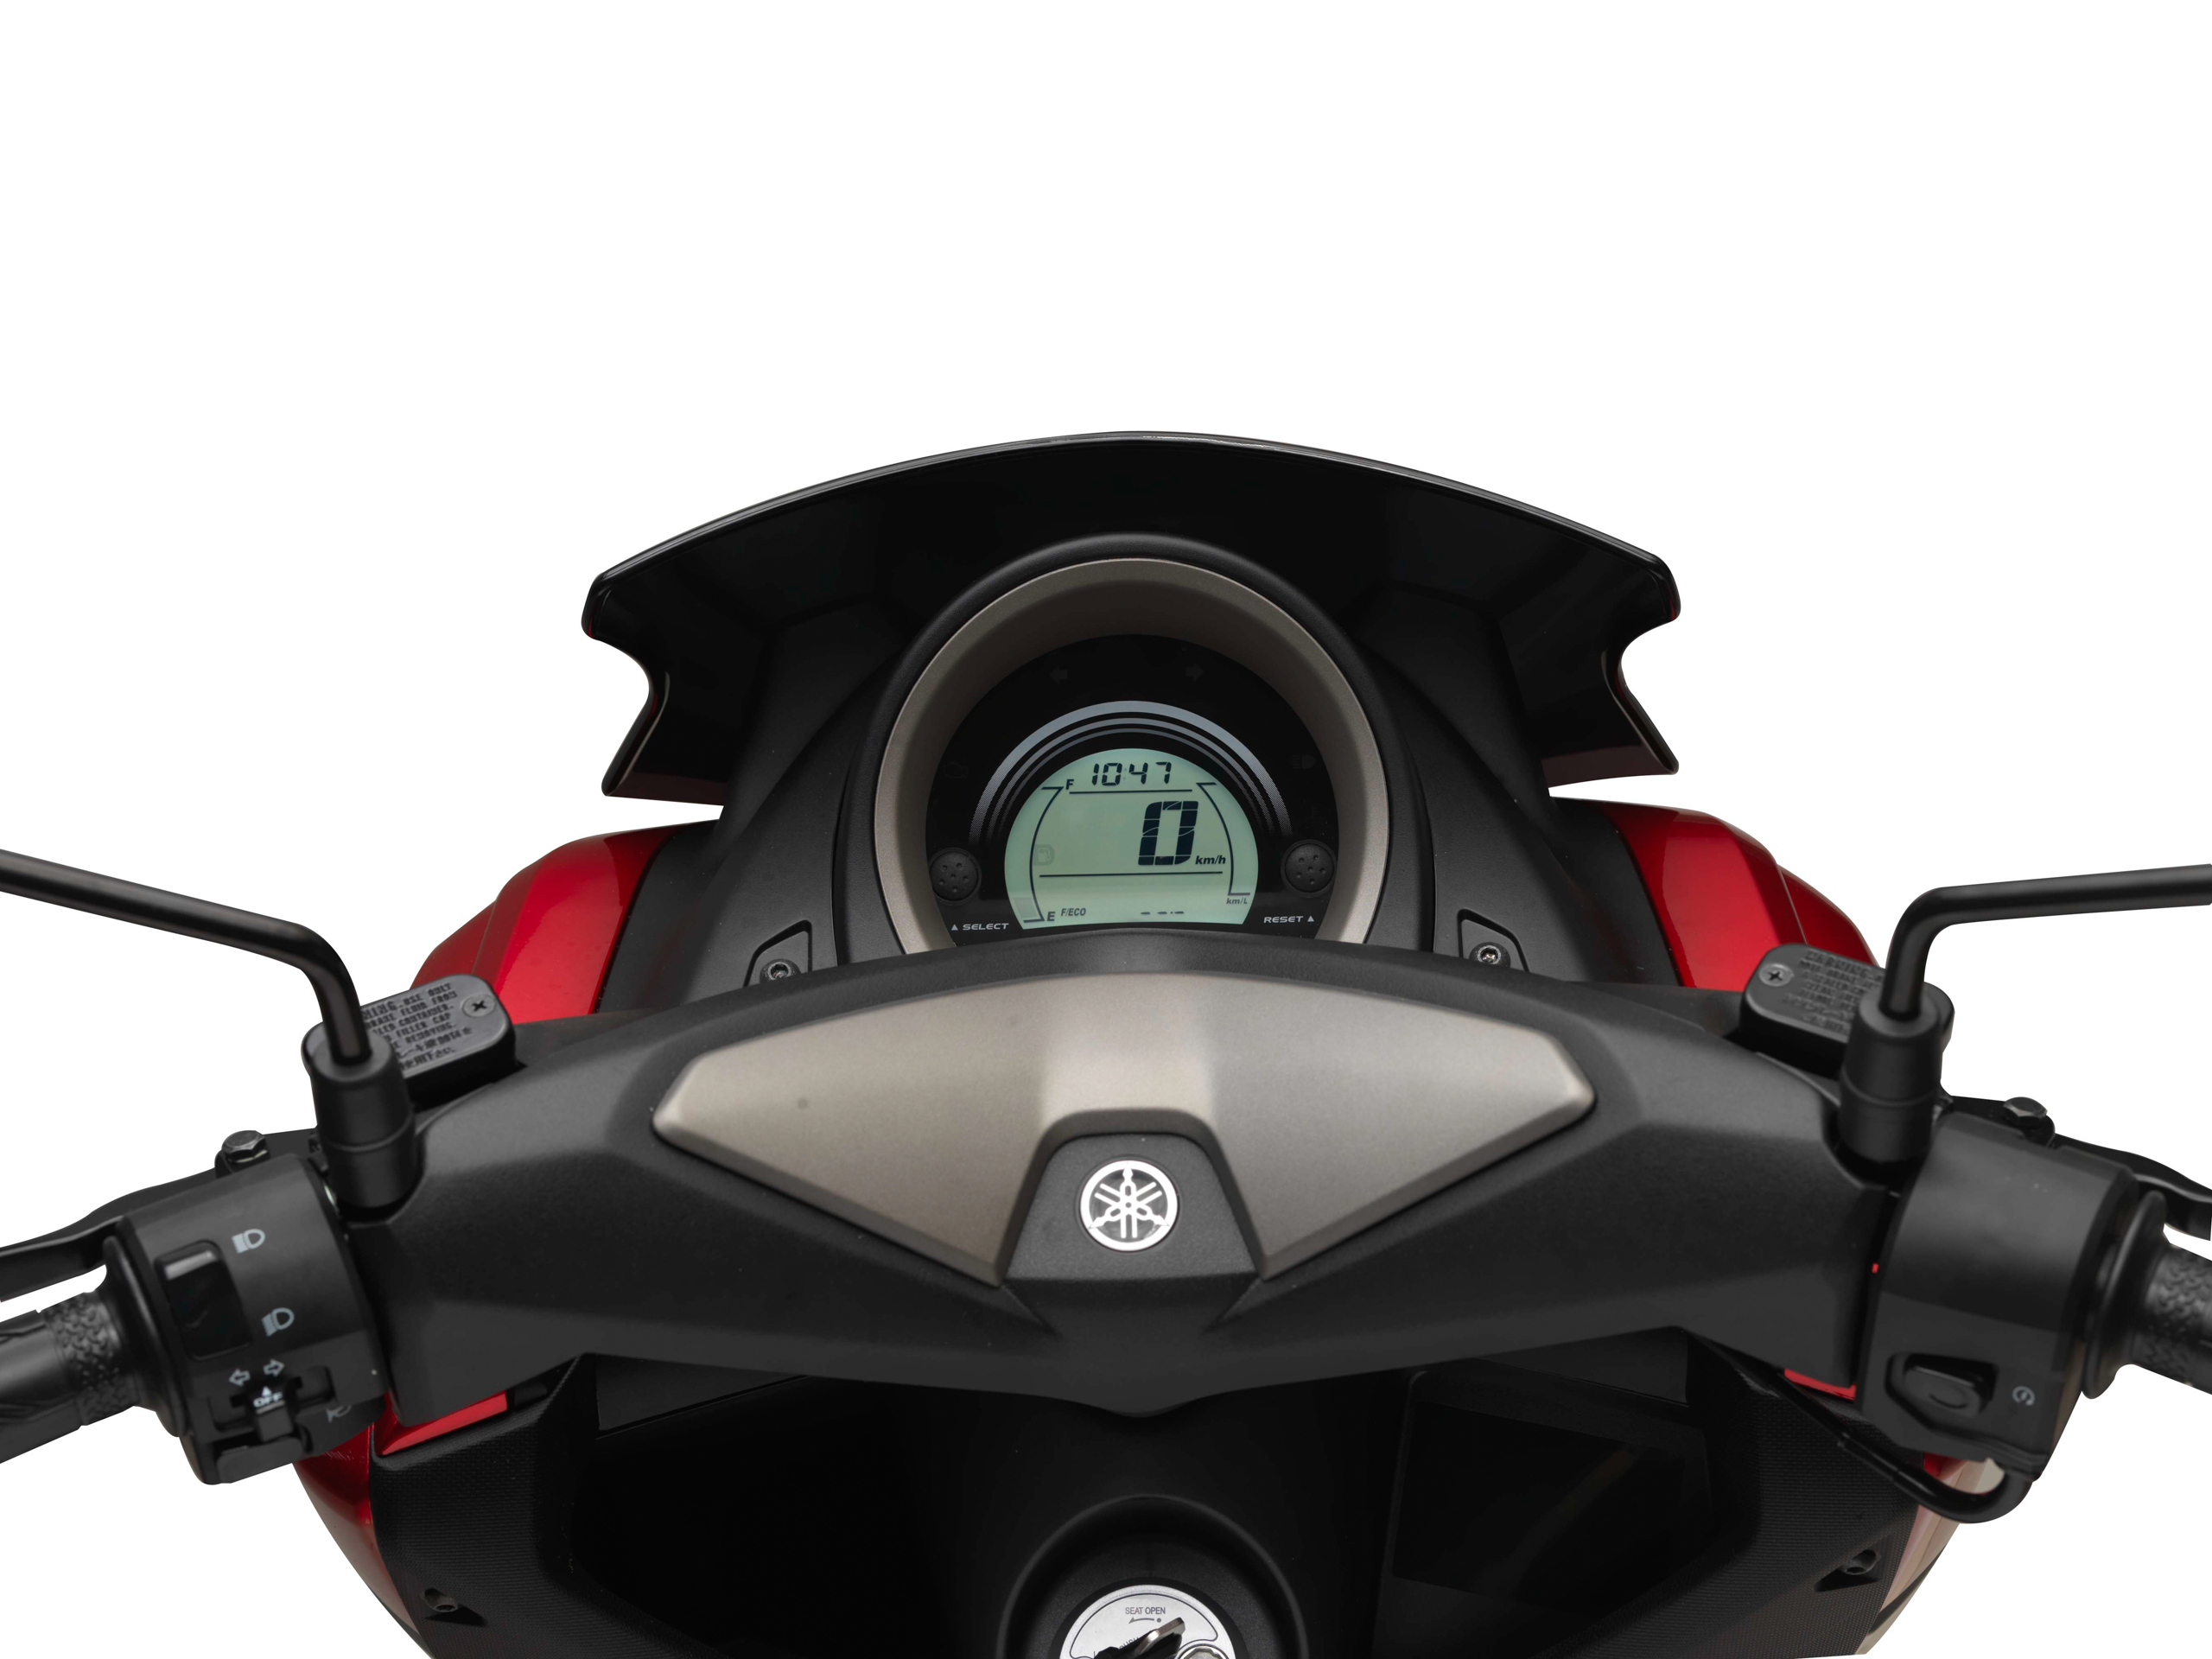 2016 Yamaha NMax scooter launched - more details Yamaha NMax Scooter-22 ...